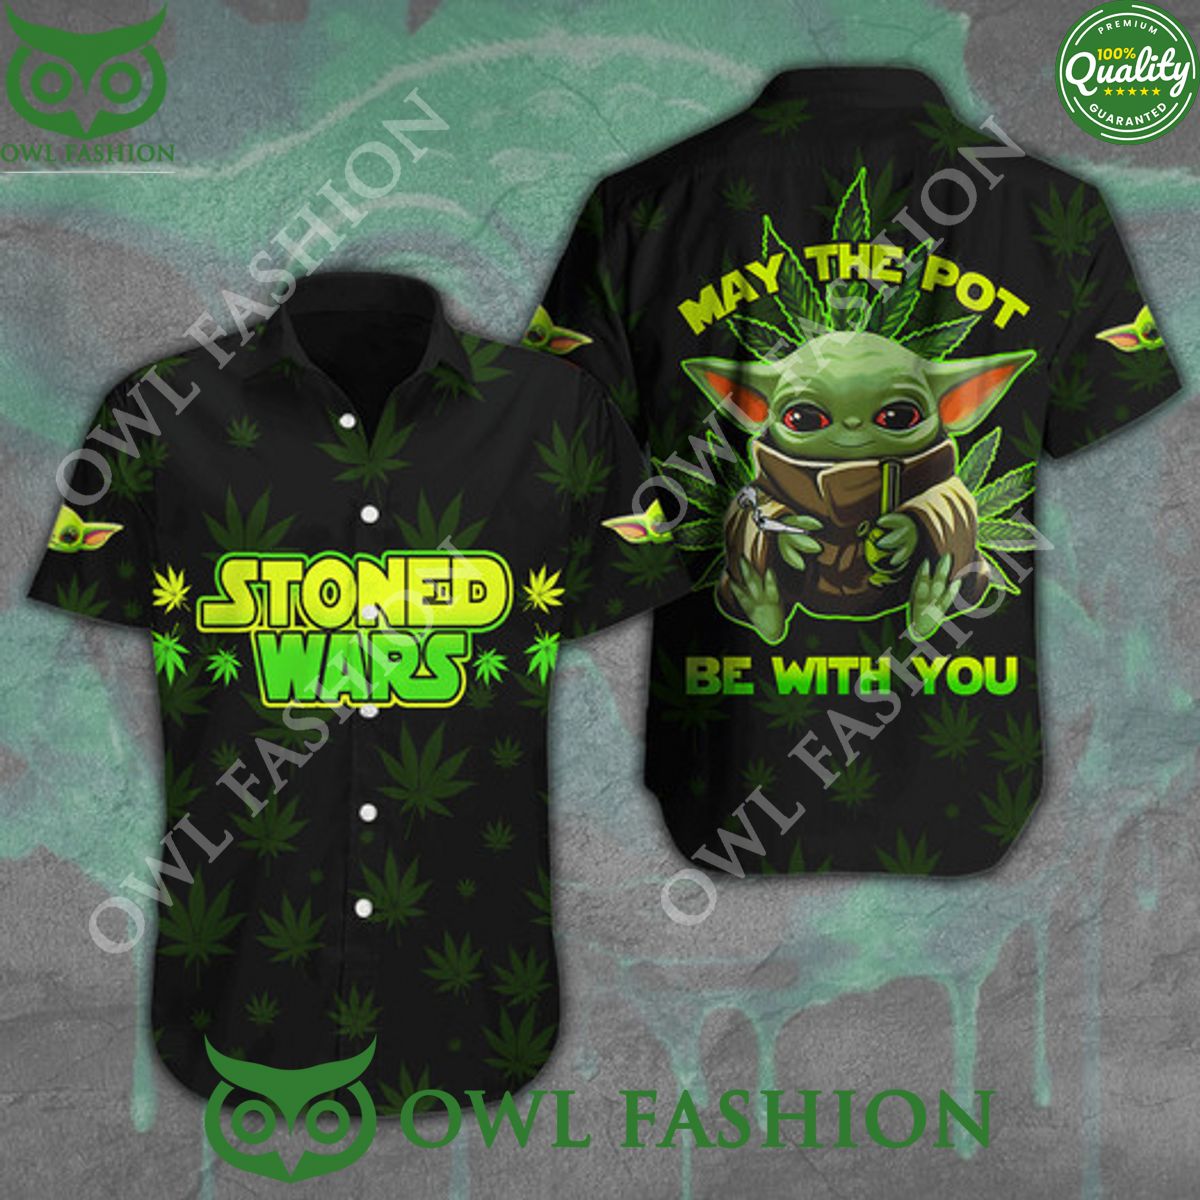 Stoned wars may the pot be with you yoda weed hawaiian shirt Rocking picture